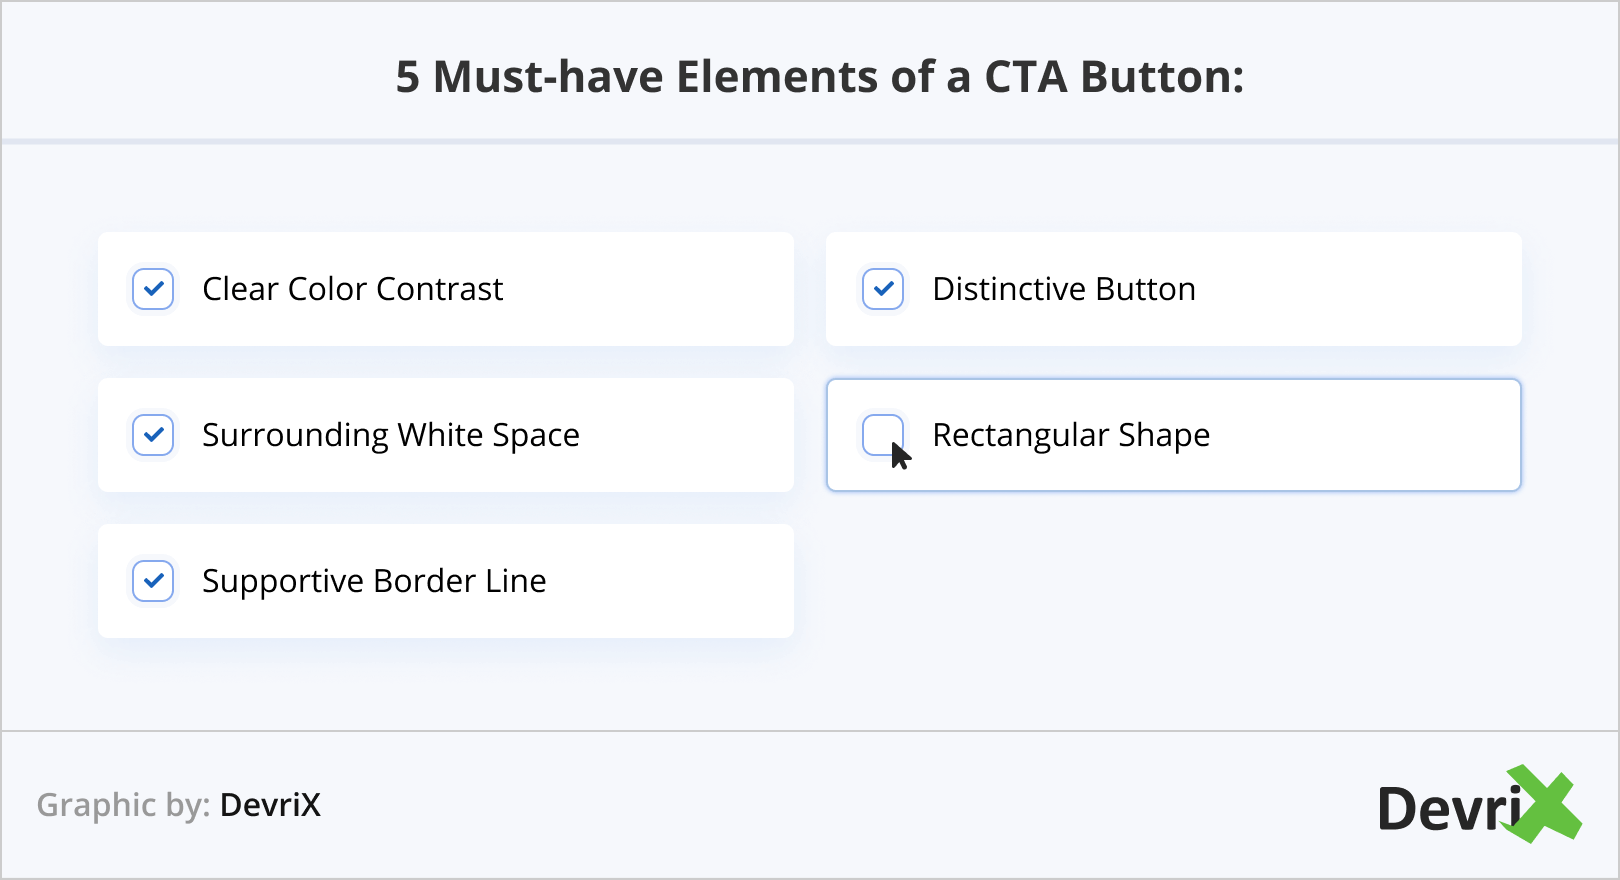 5 Must-have Elements of a CTA Button